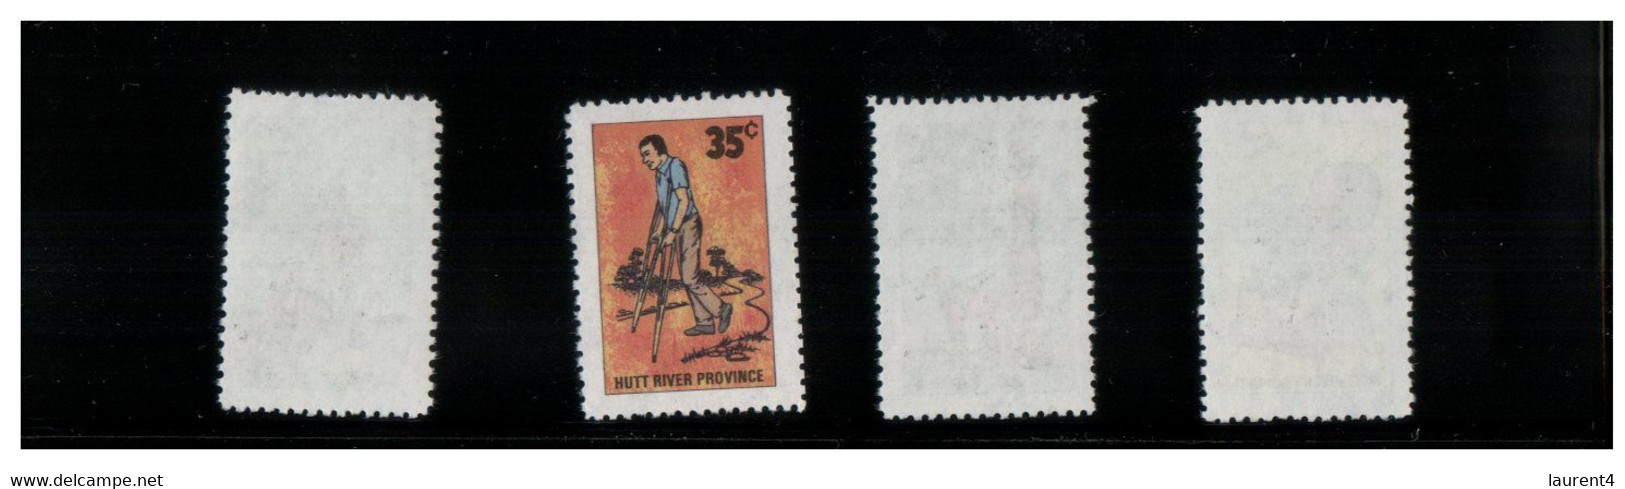 (O 17) Australia - Hutt River Province Cinderella Stamps (micro State) 1981 Disabled Year (4 Stamps) - Cinderella